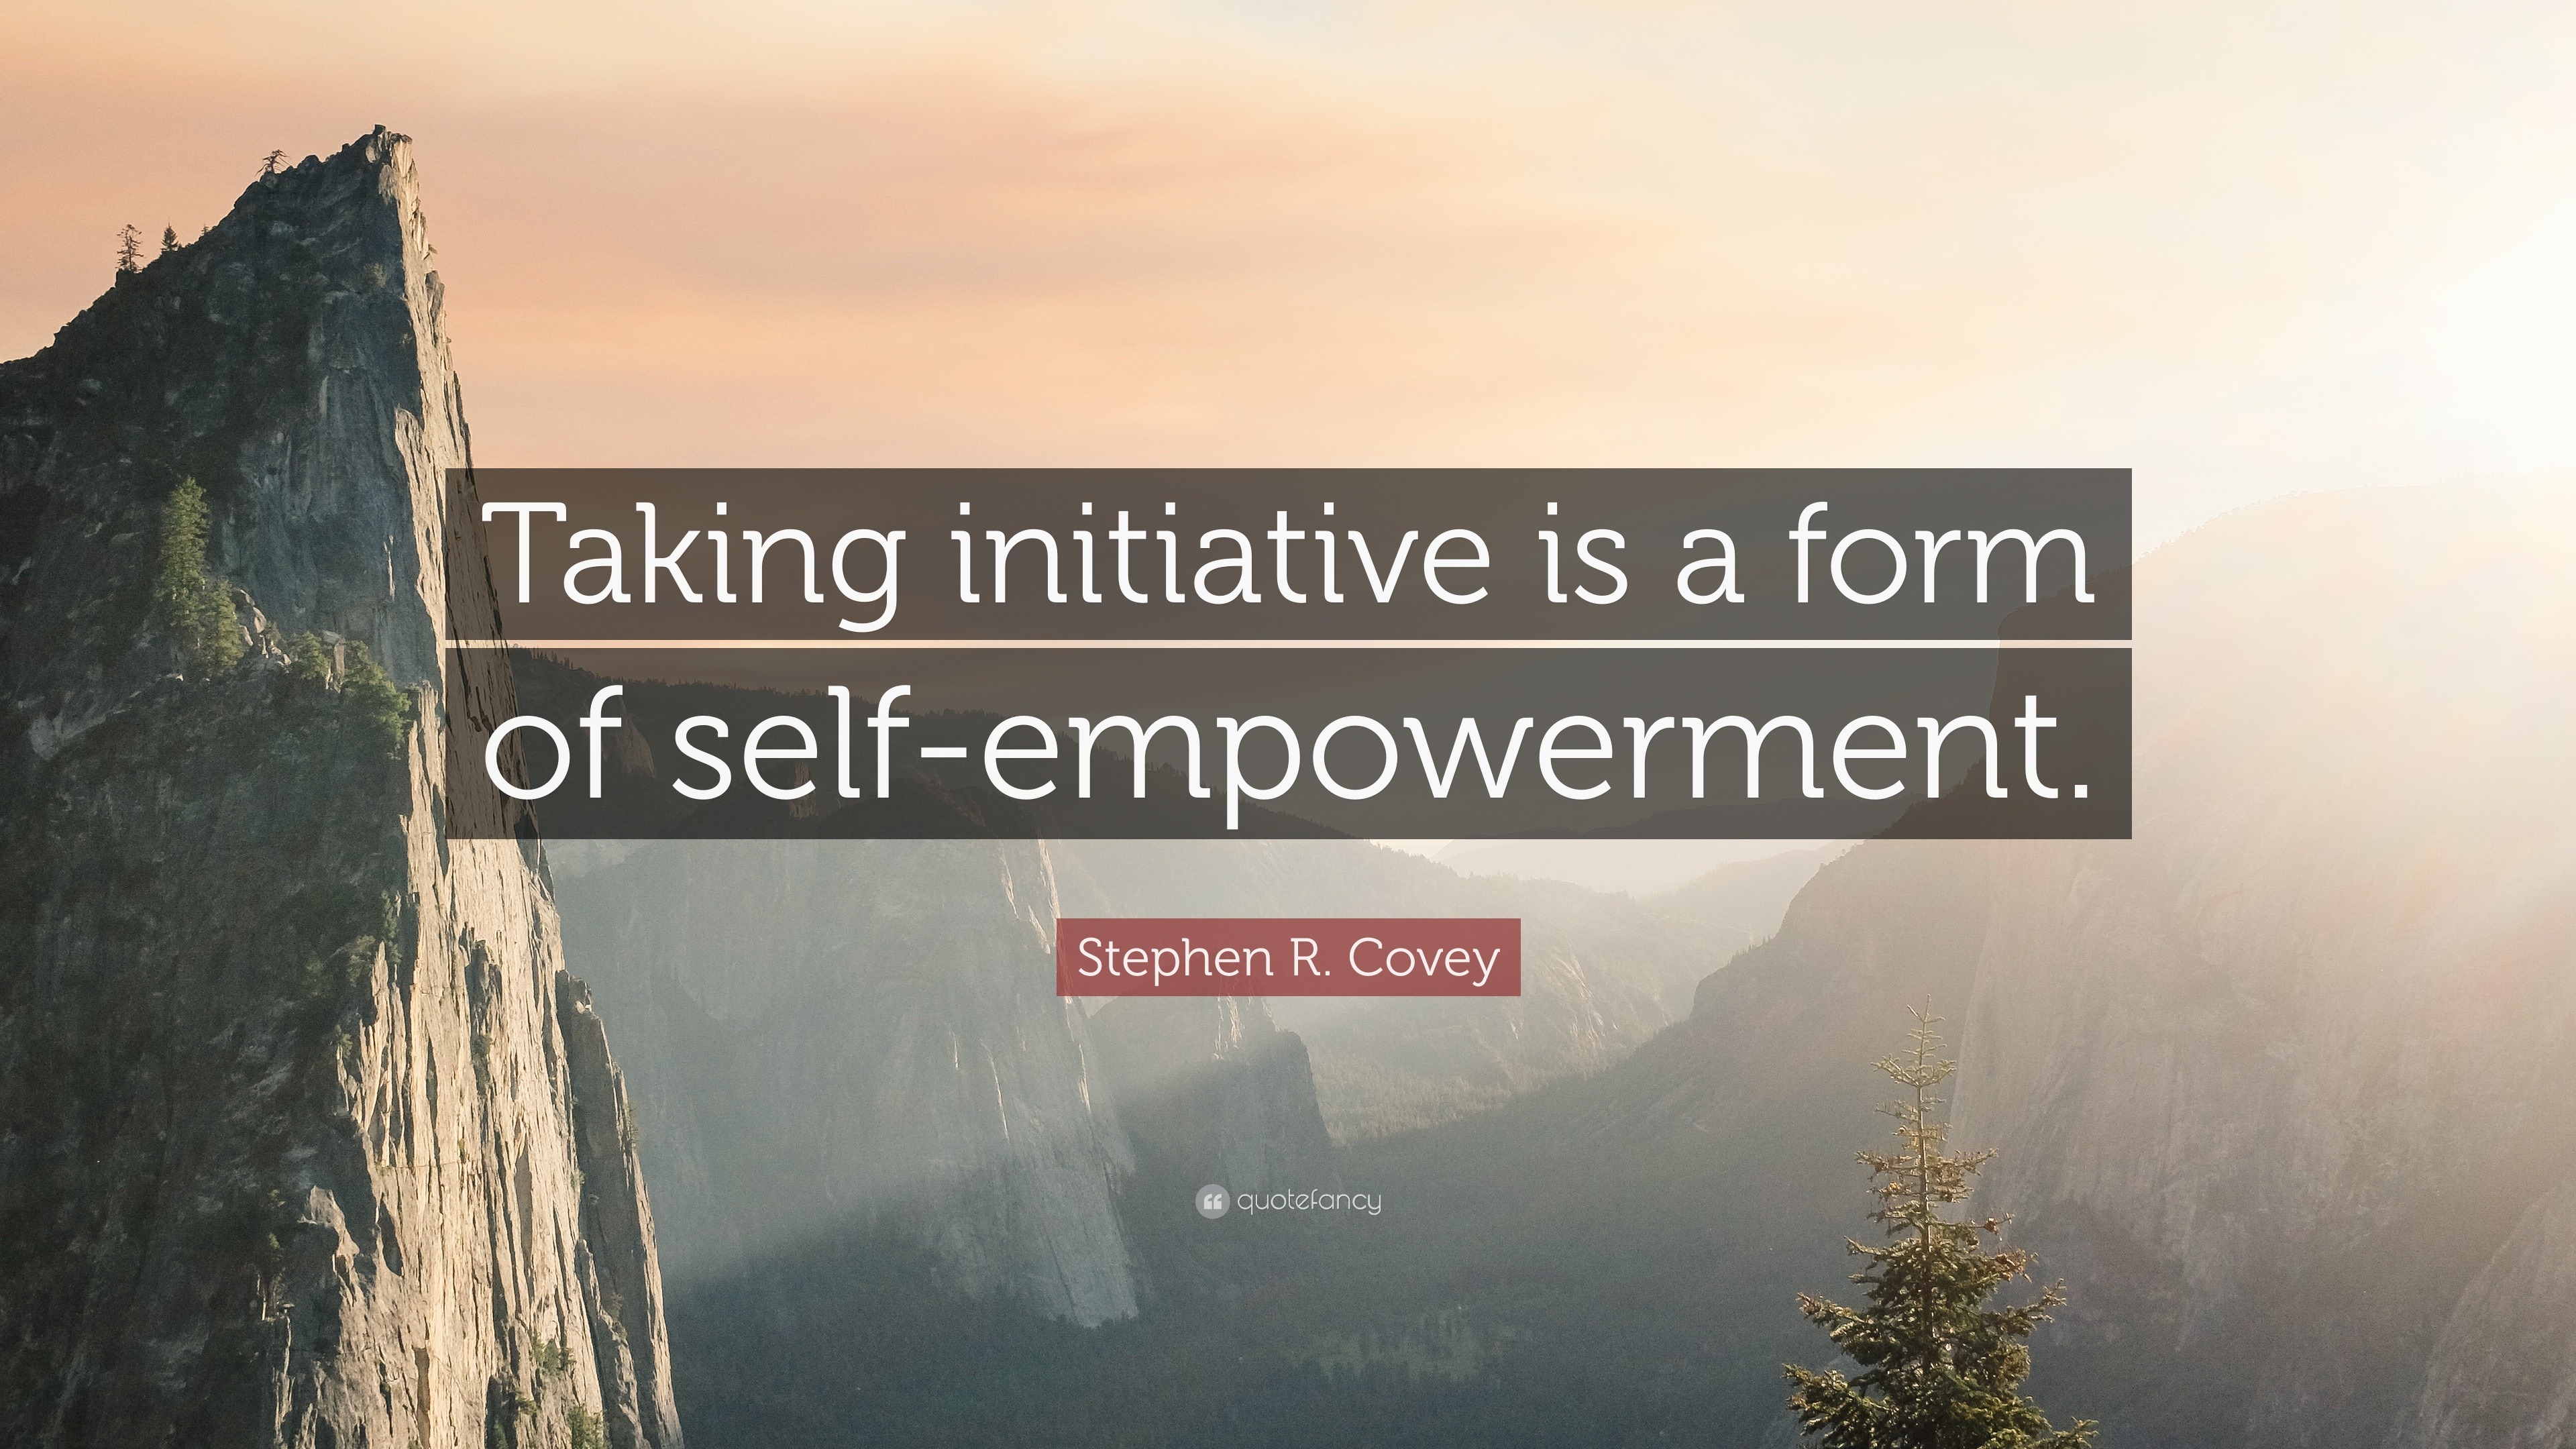 425270 Stephen R Covey Quote Taking initiative is a form of self